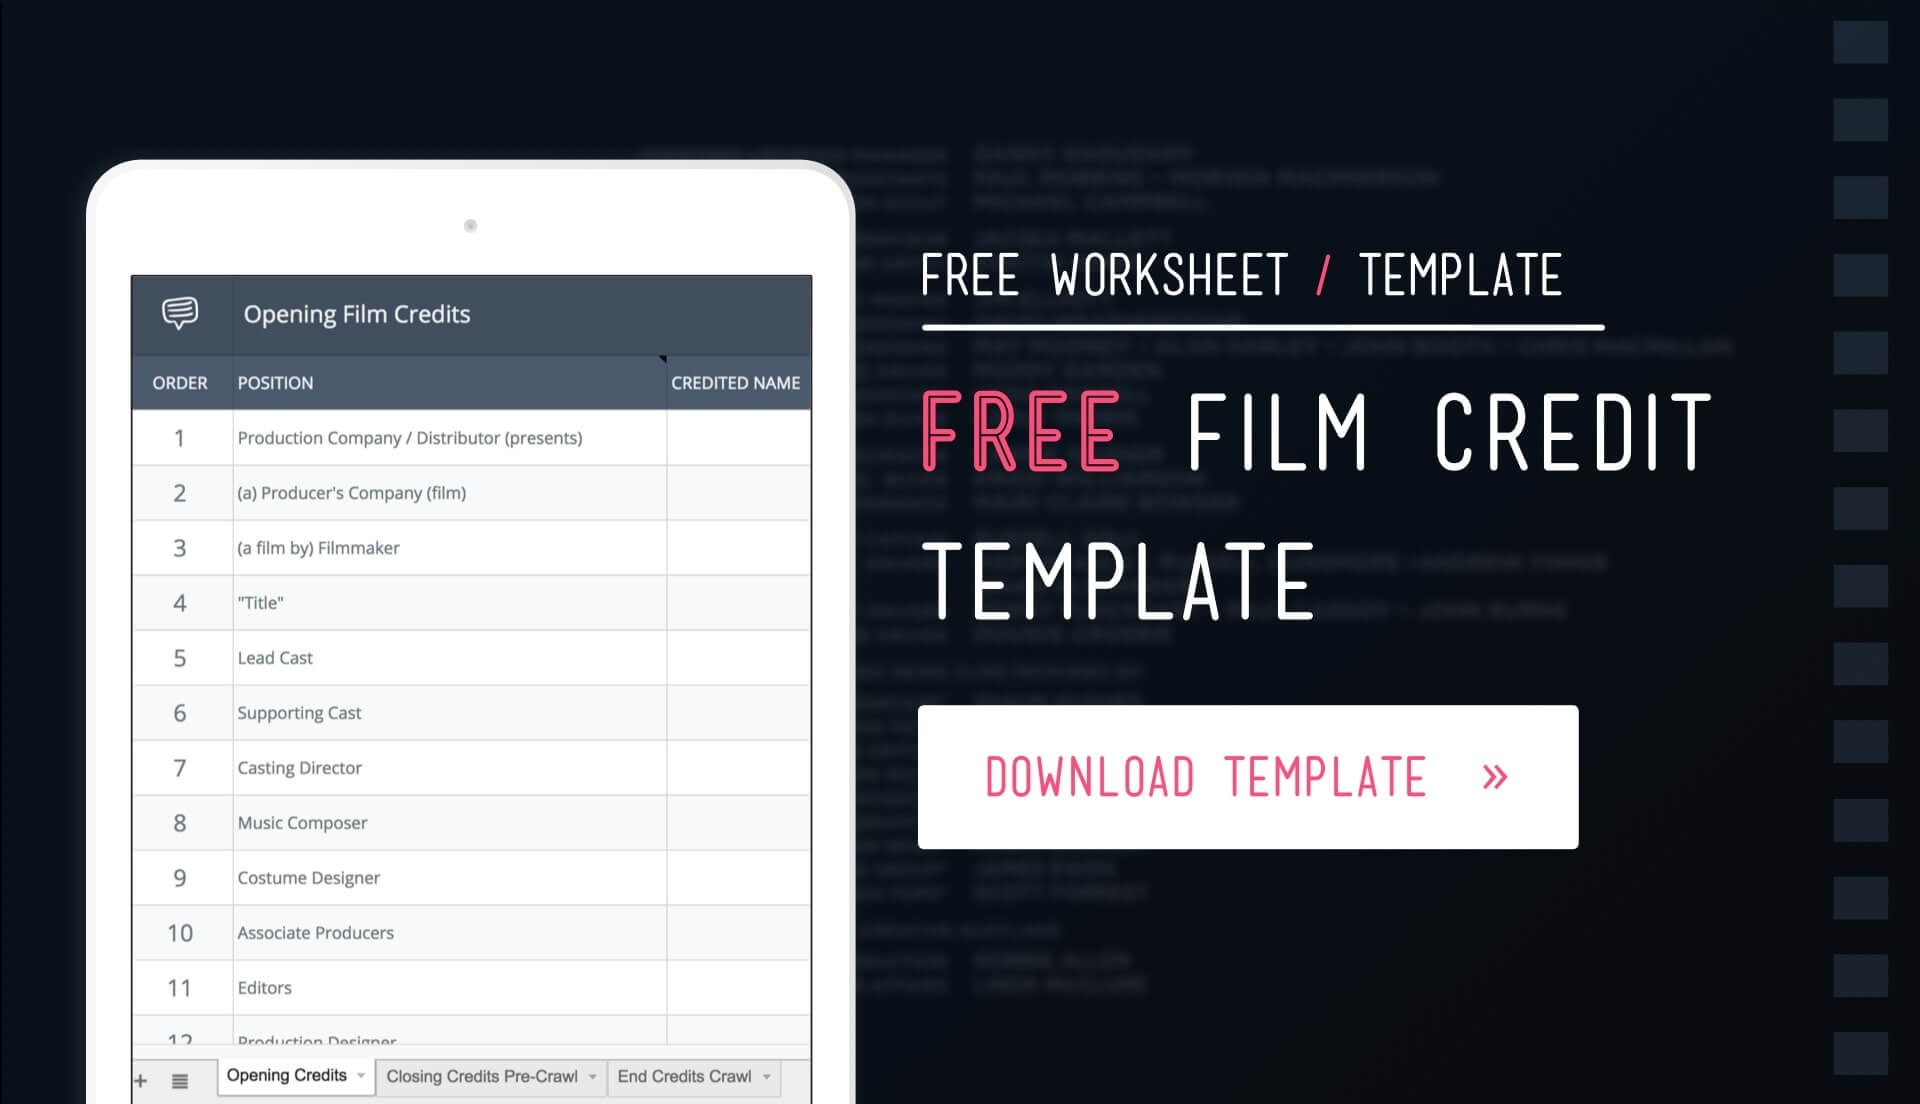 Download Free Film Credits Order Template and Worksheet - Featured - StudioBinder